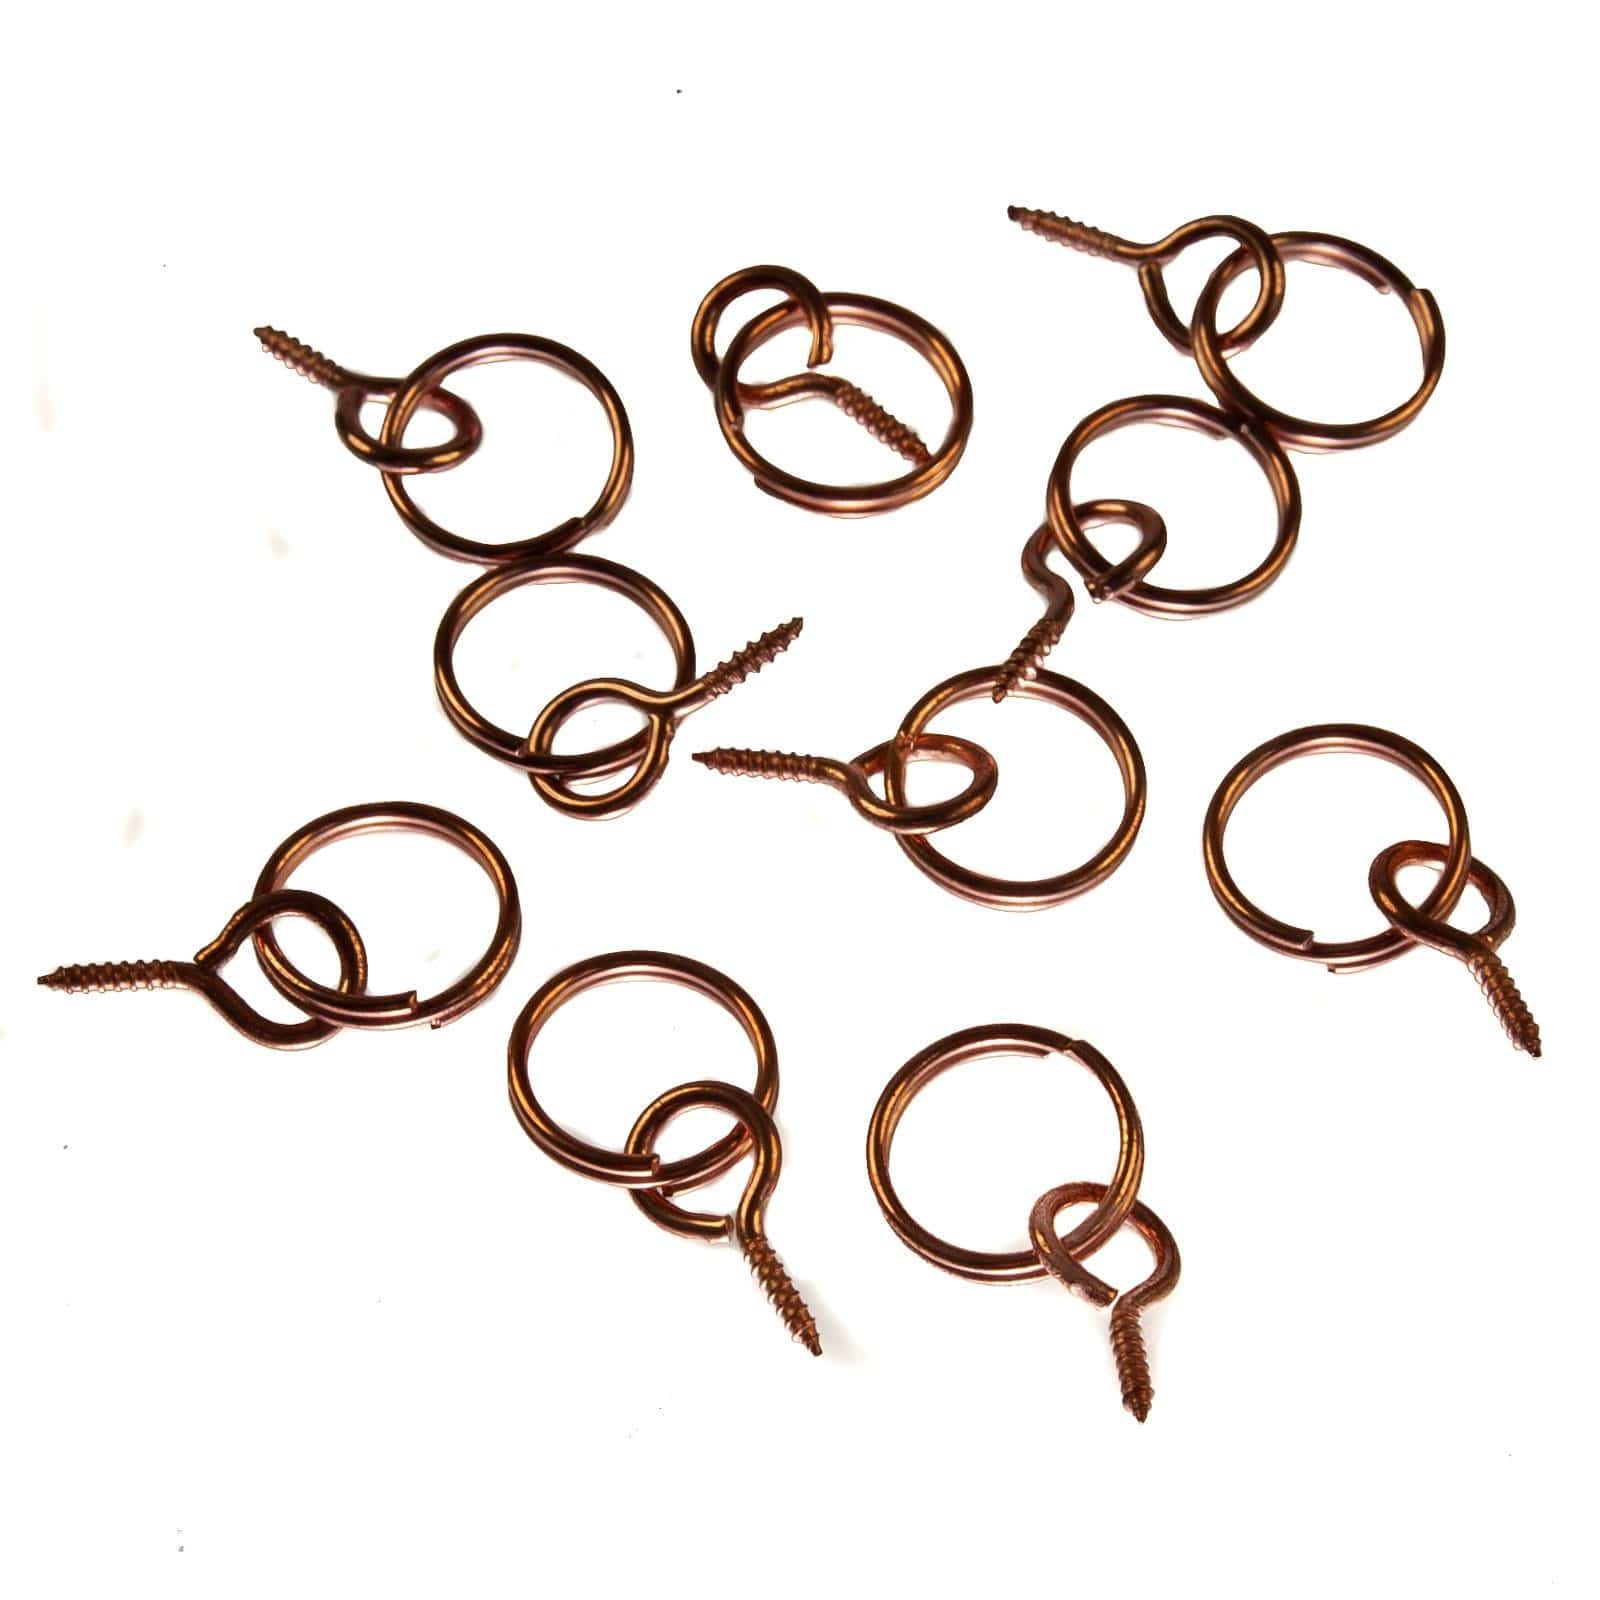 Picture Hanging Coppered Screw Ring 19mm x 1.6mm - 16mm Diameter Ring (Pack of 10) Service Item Thunderfix 902031